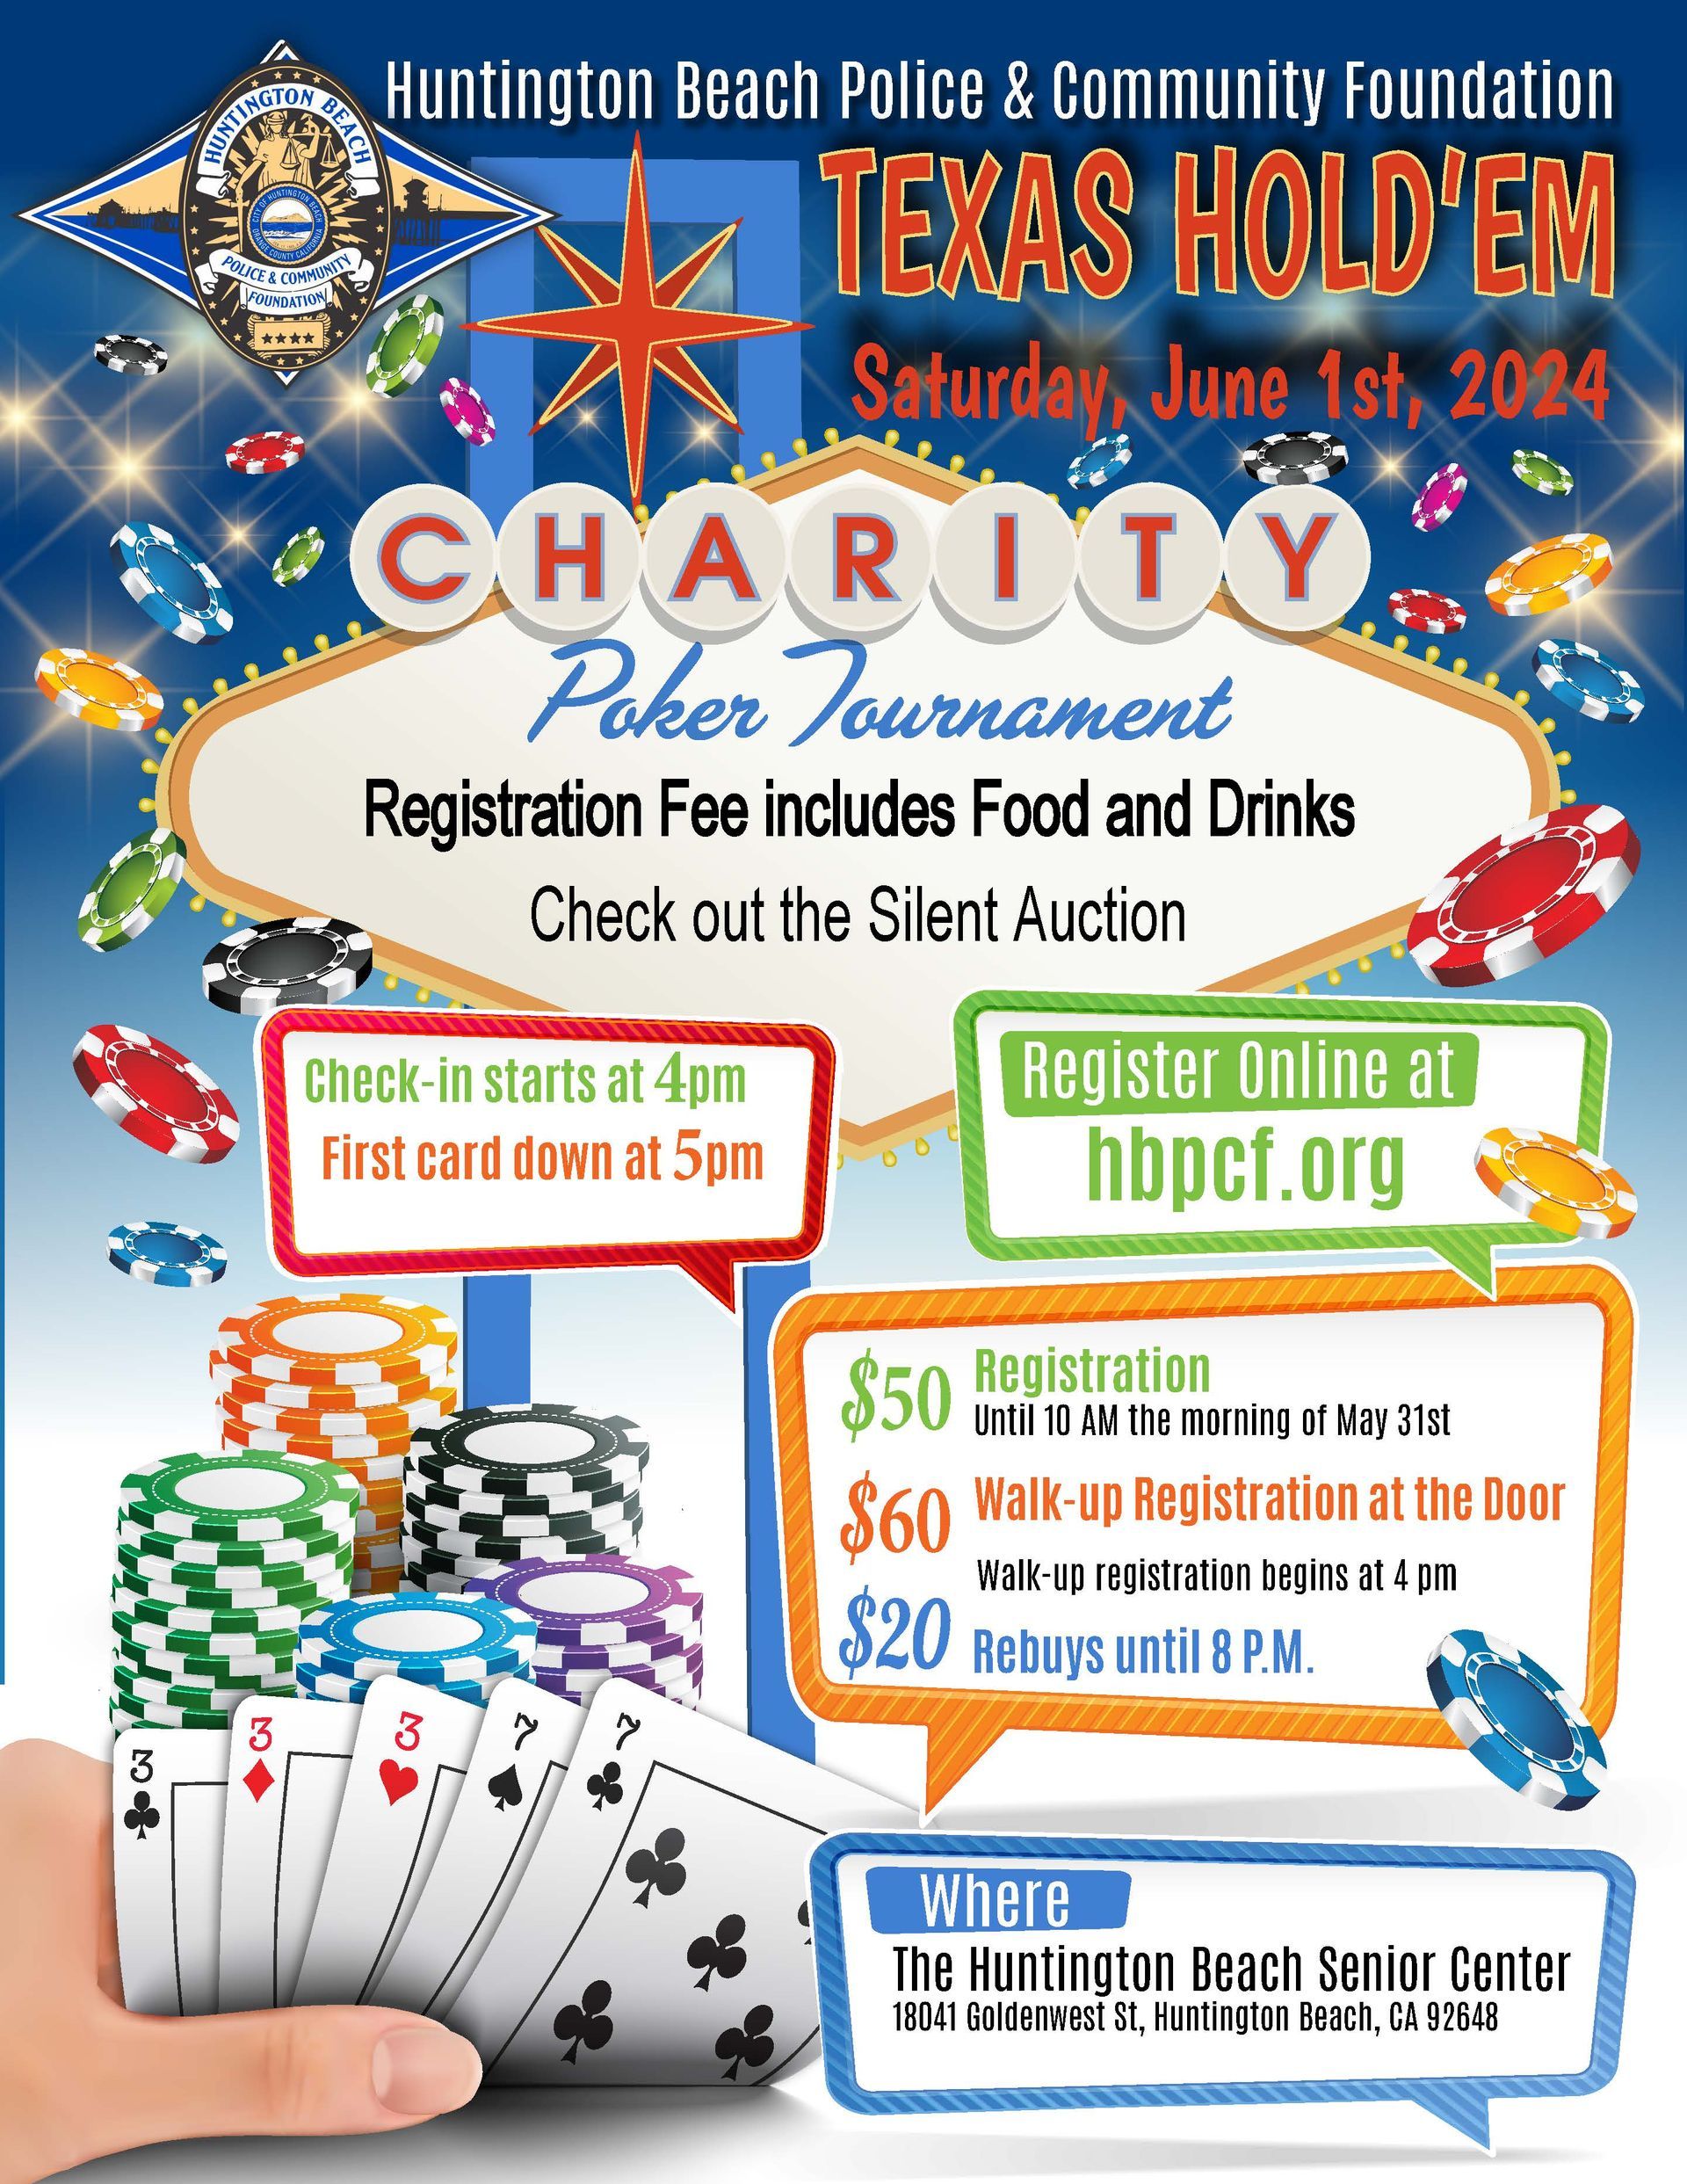 Texas Hold'em Charity tournament